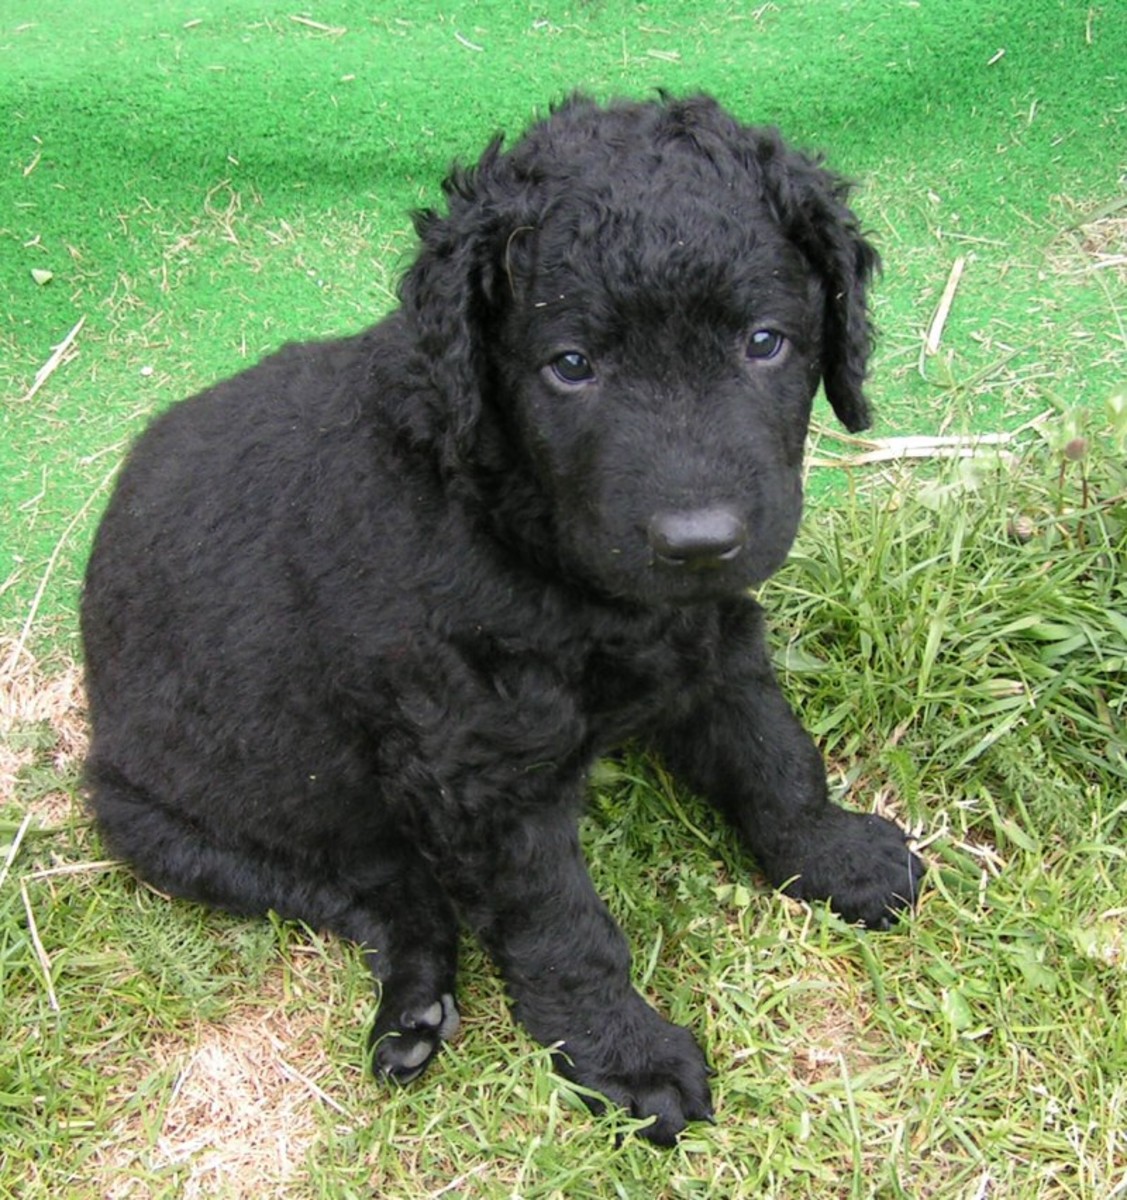 An adorable Curly-Coated Retriever puppy.